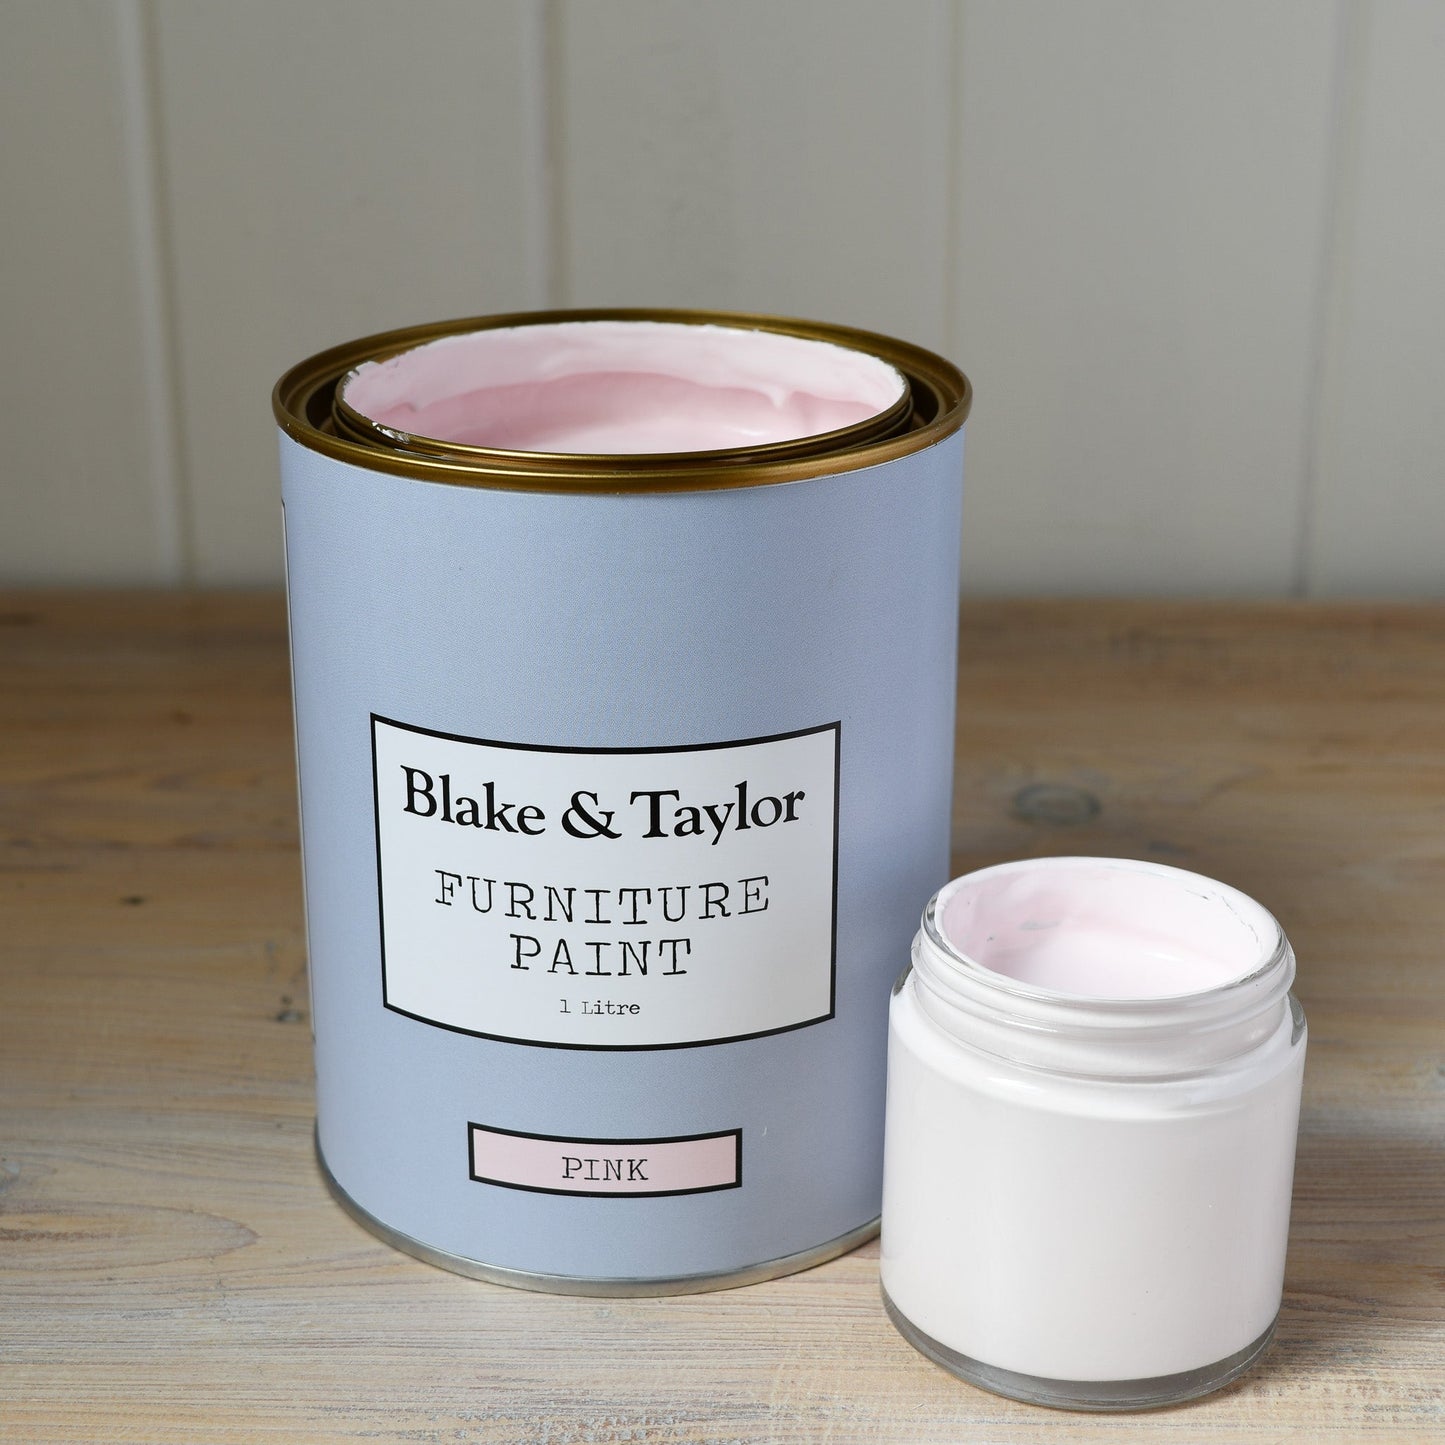 1 litre and 120ml pots of Blake & Taylor Chalk Furniture Paint colour Pink